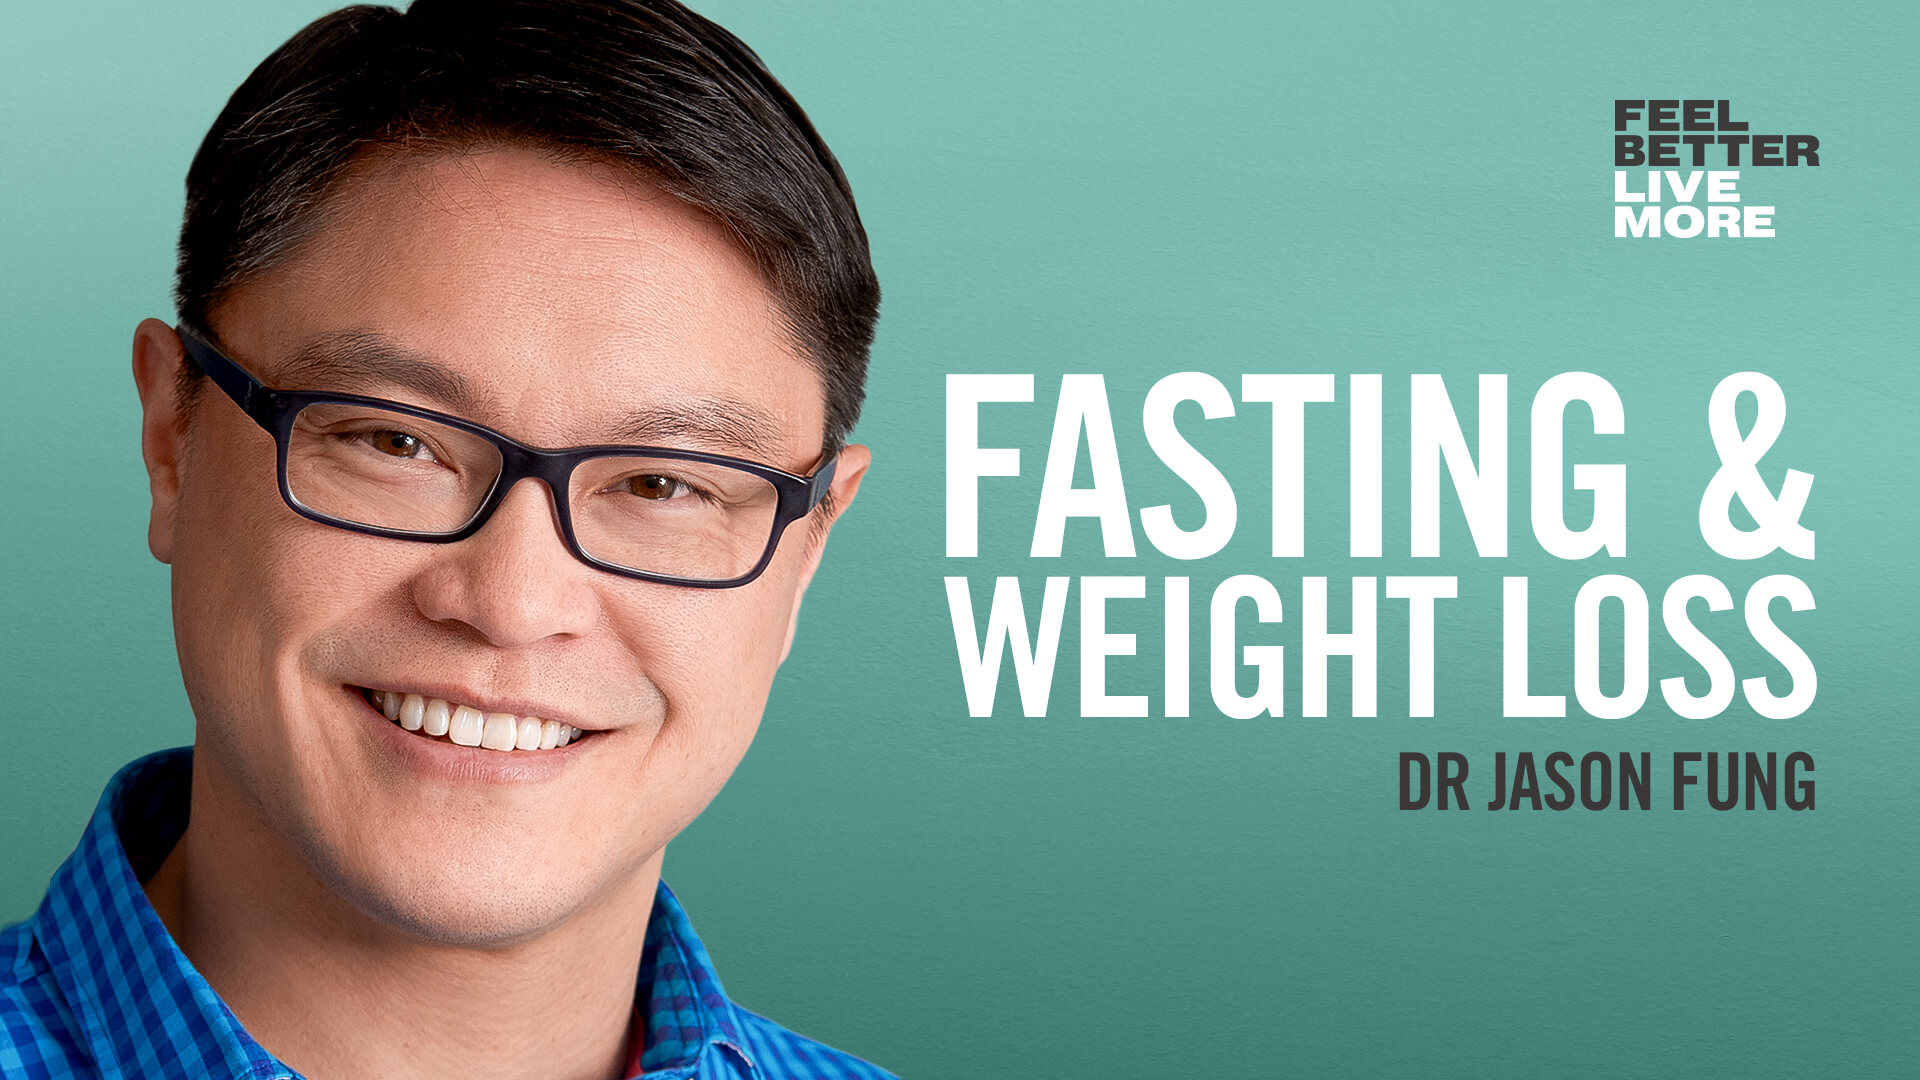 Fasting expert Dr. Fung answers viewer questions